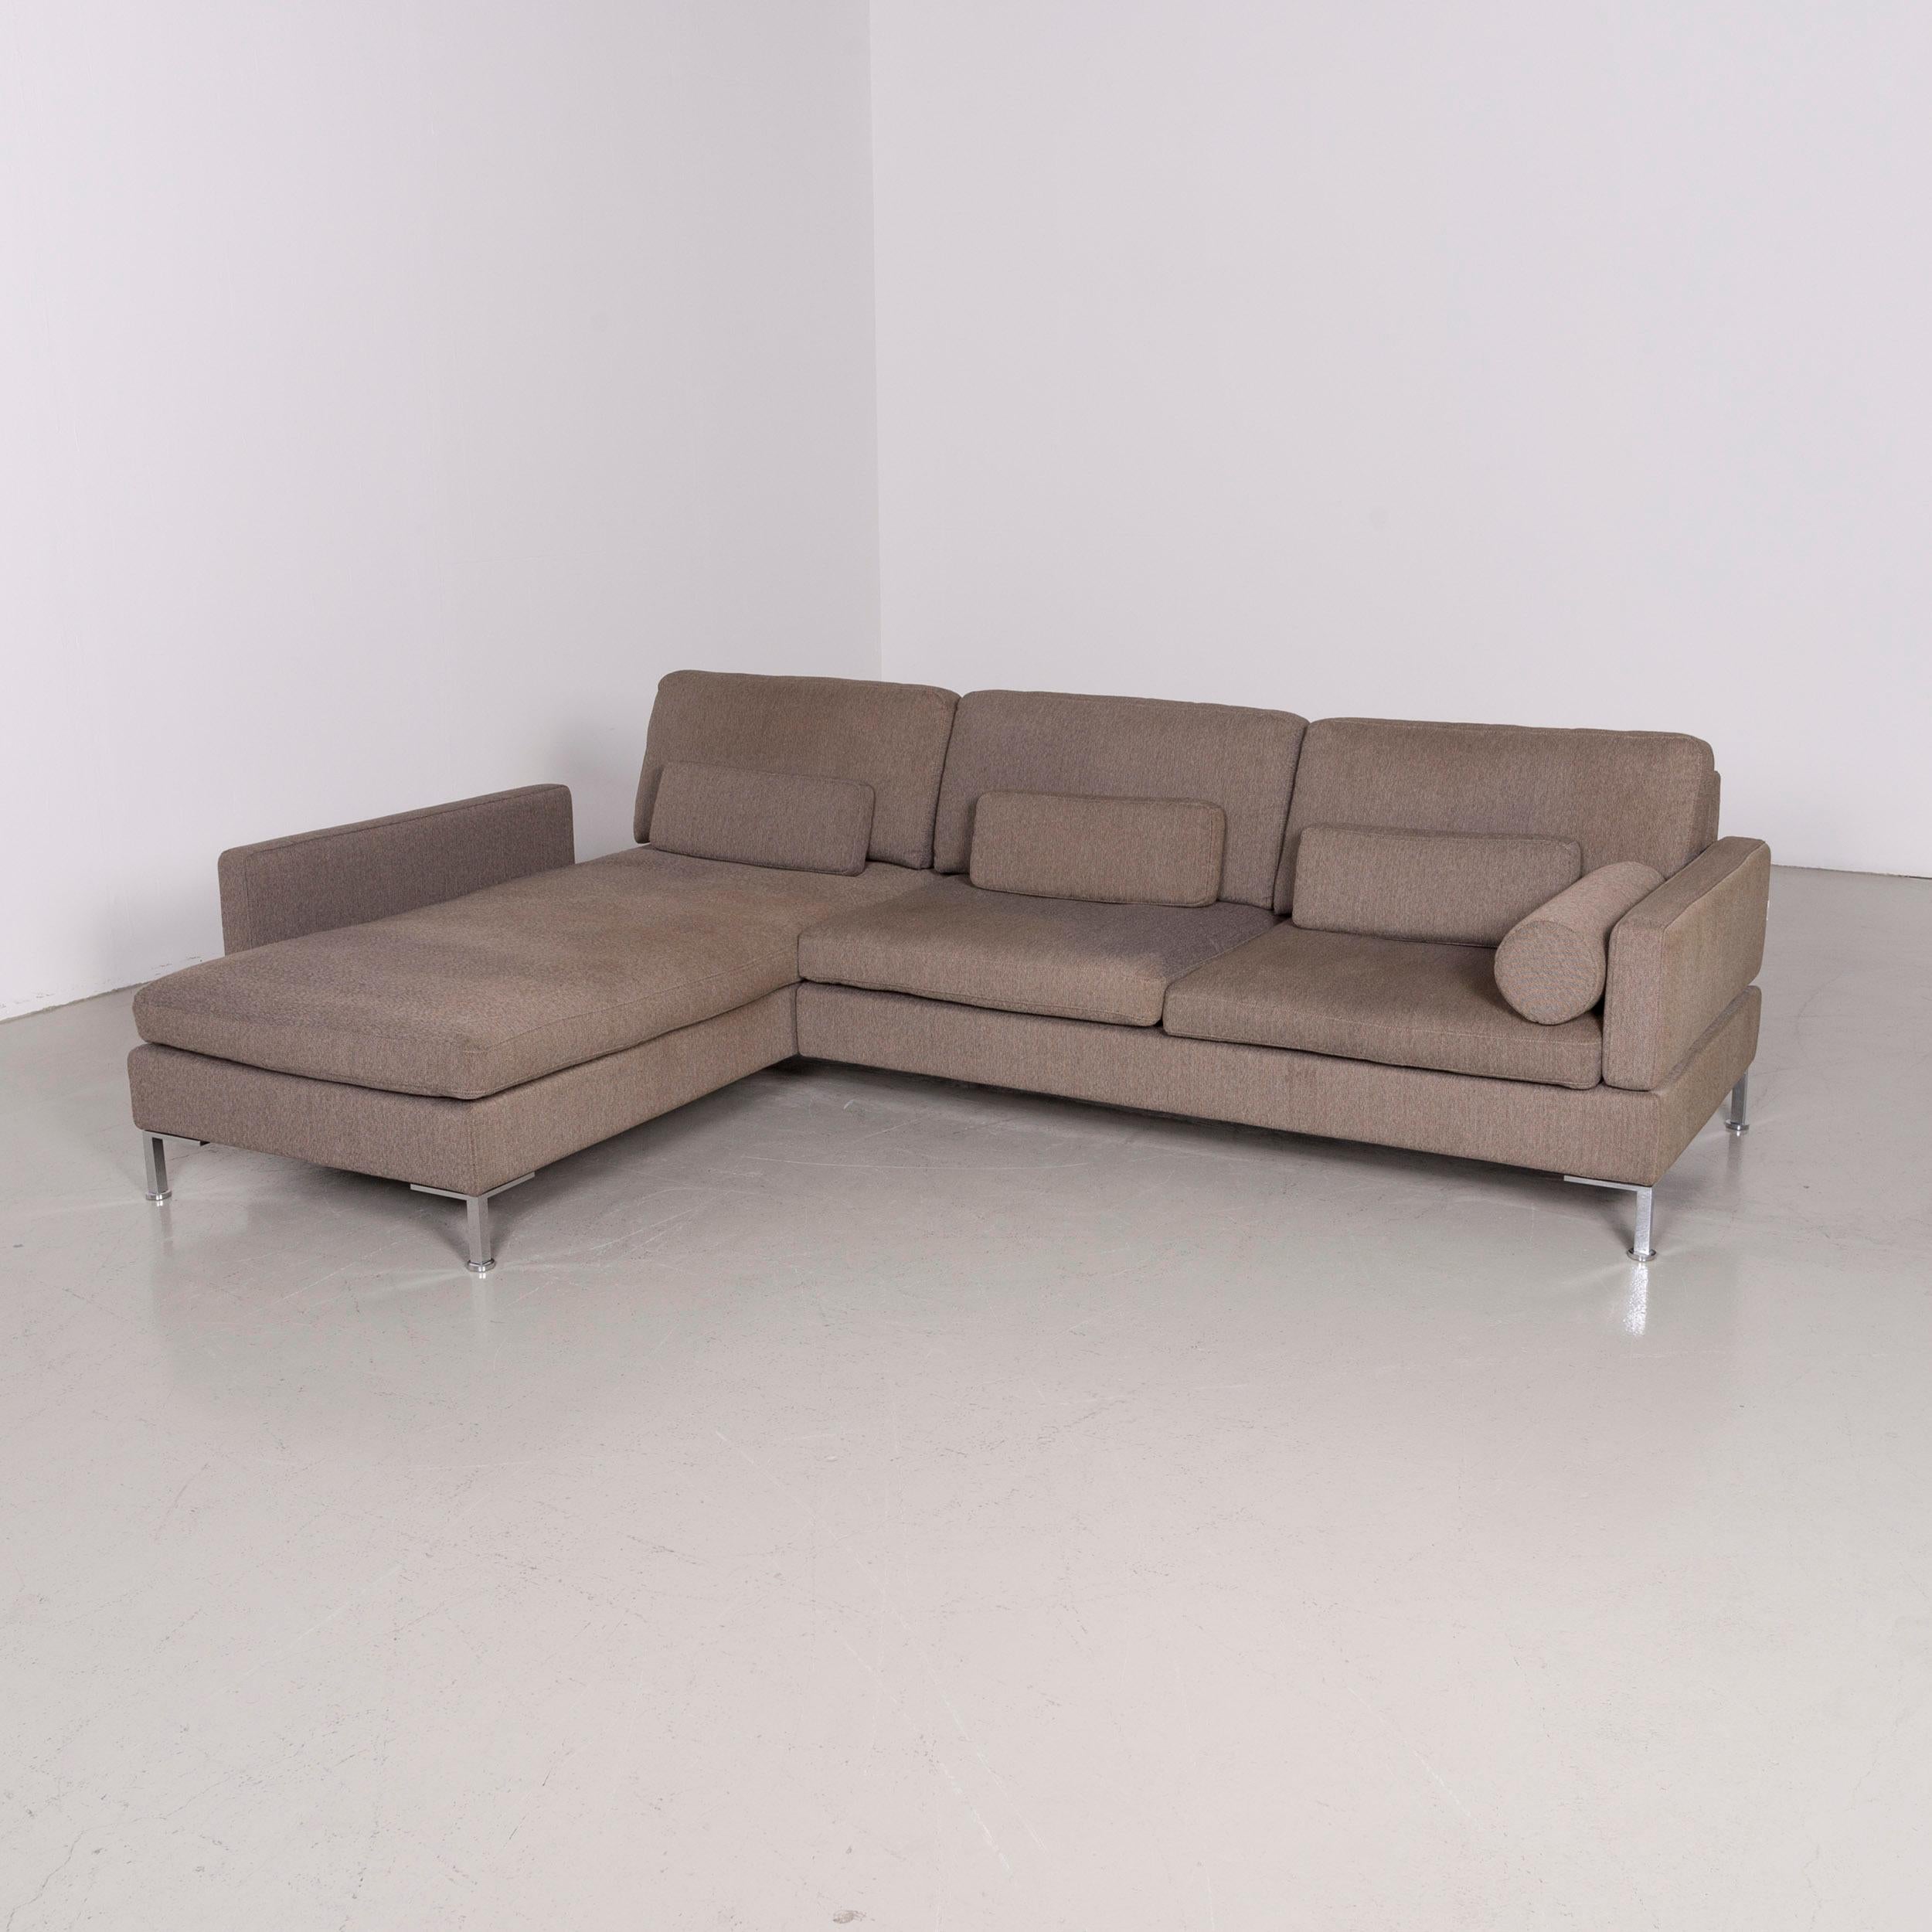 Brühl & Sippold Alba designer corner-sofa brown fabric couch with function.
 